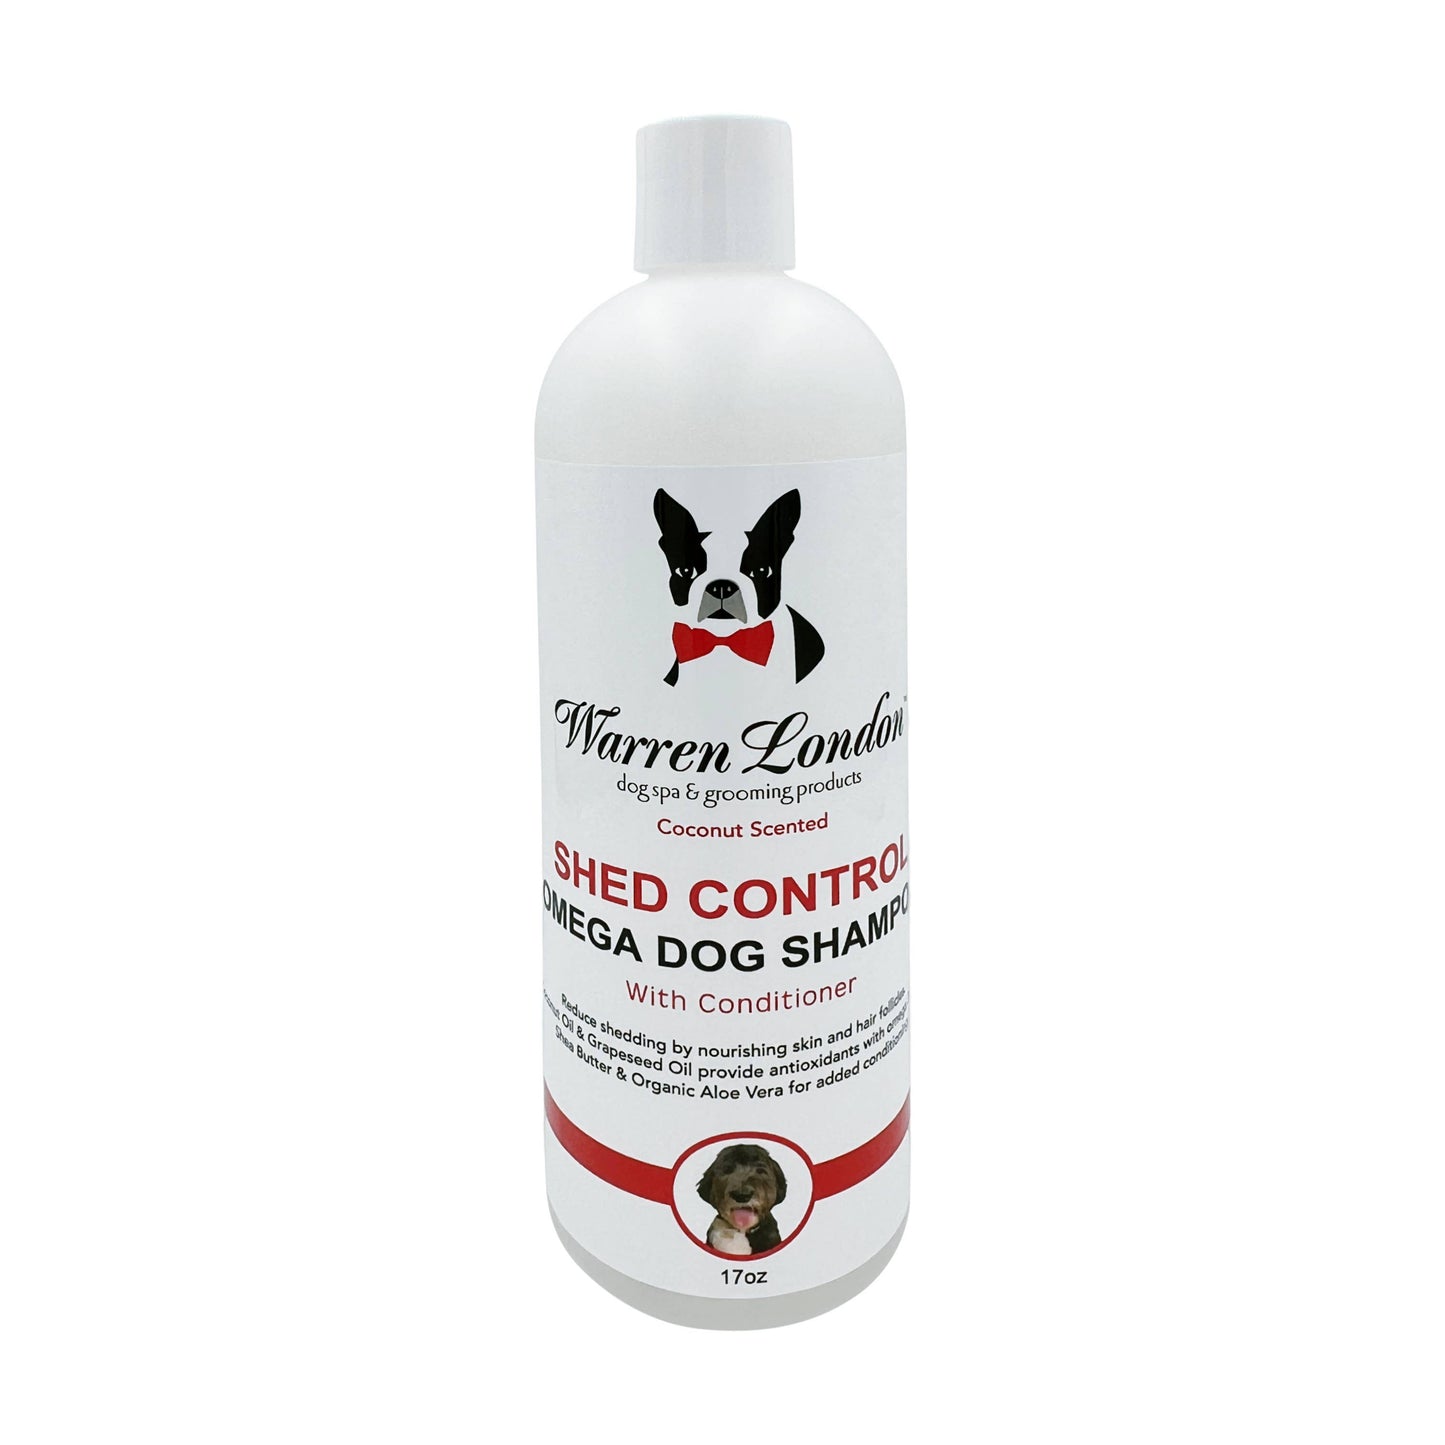 Warren London Dog Products - Shed Control Shampoo for Dogs  Image